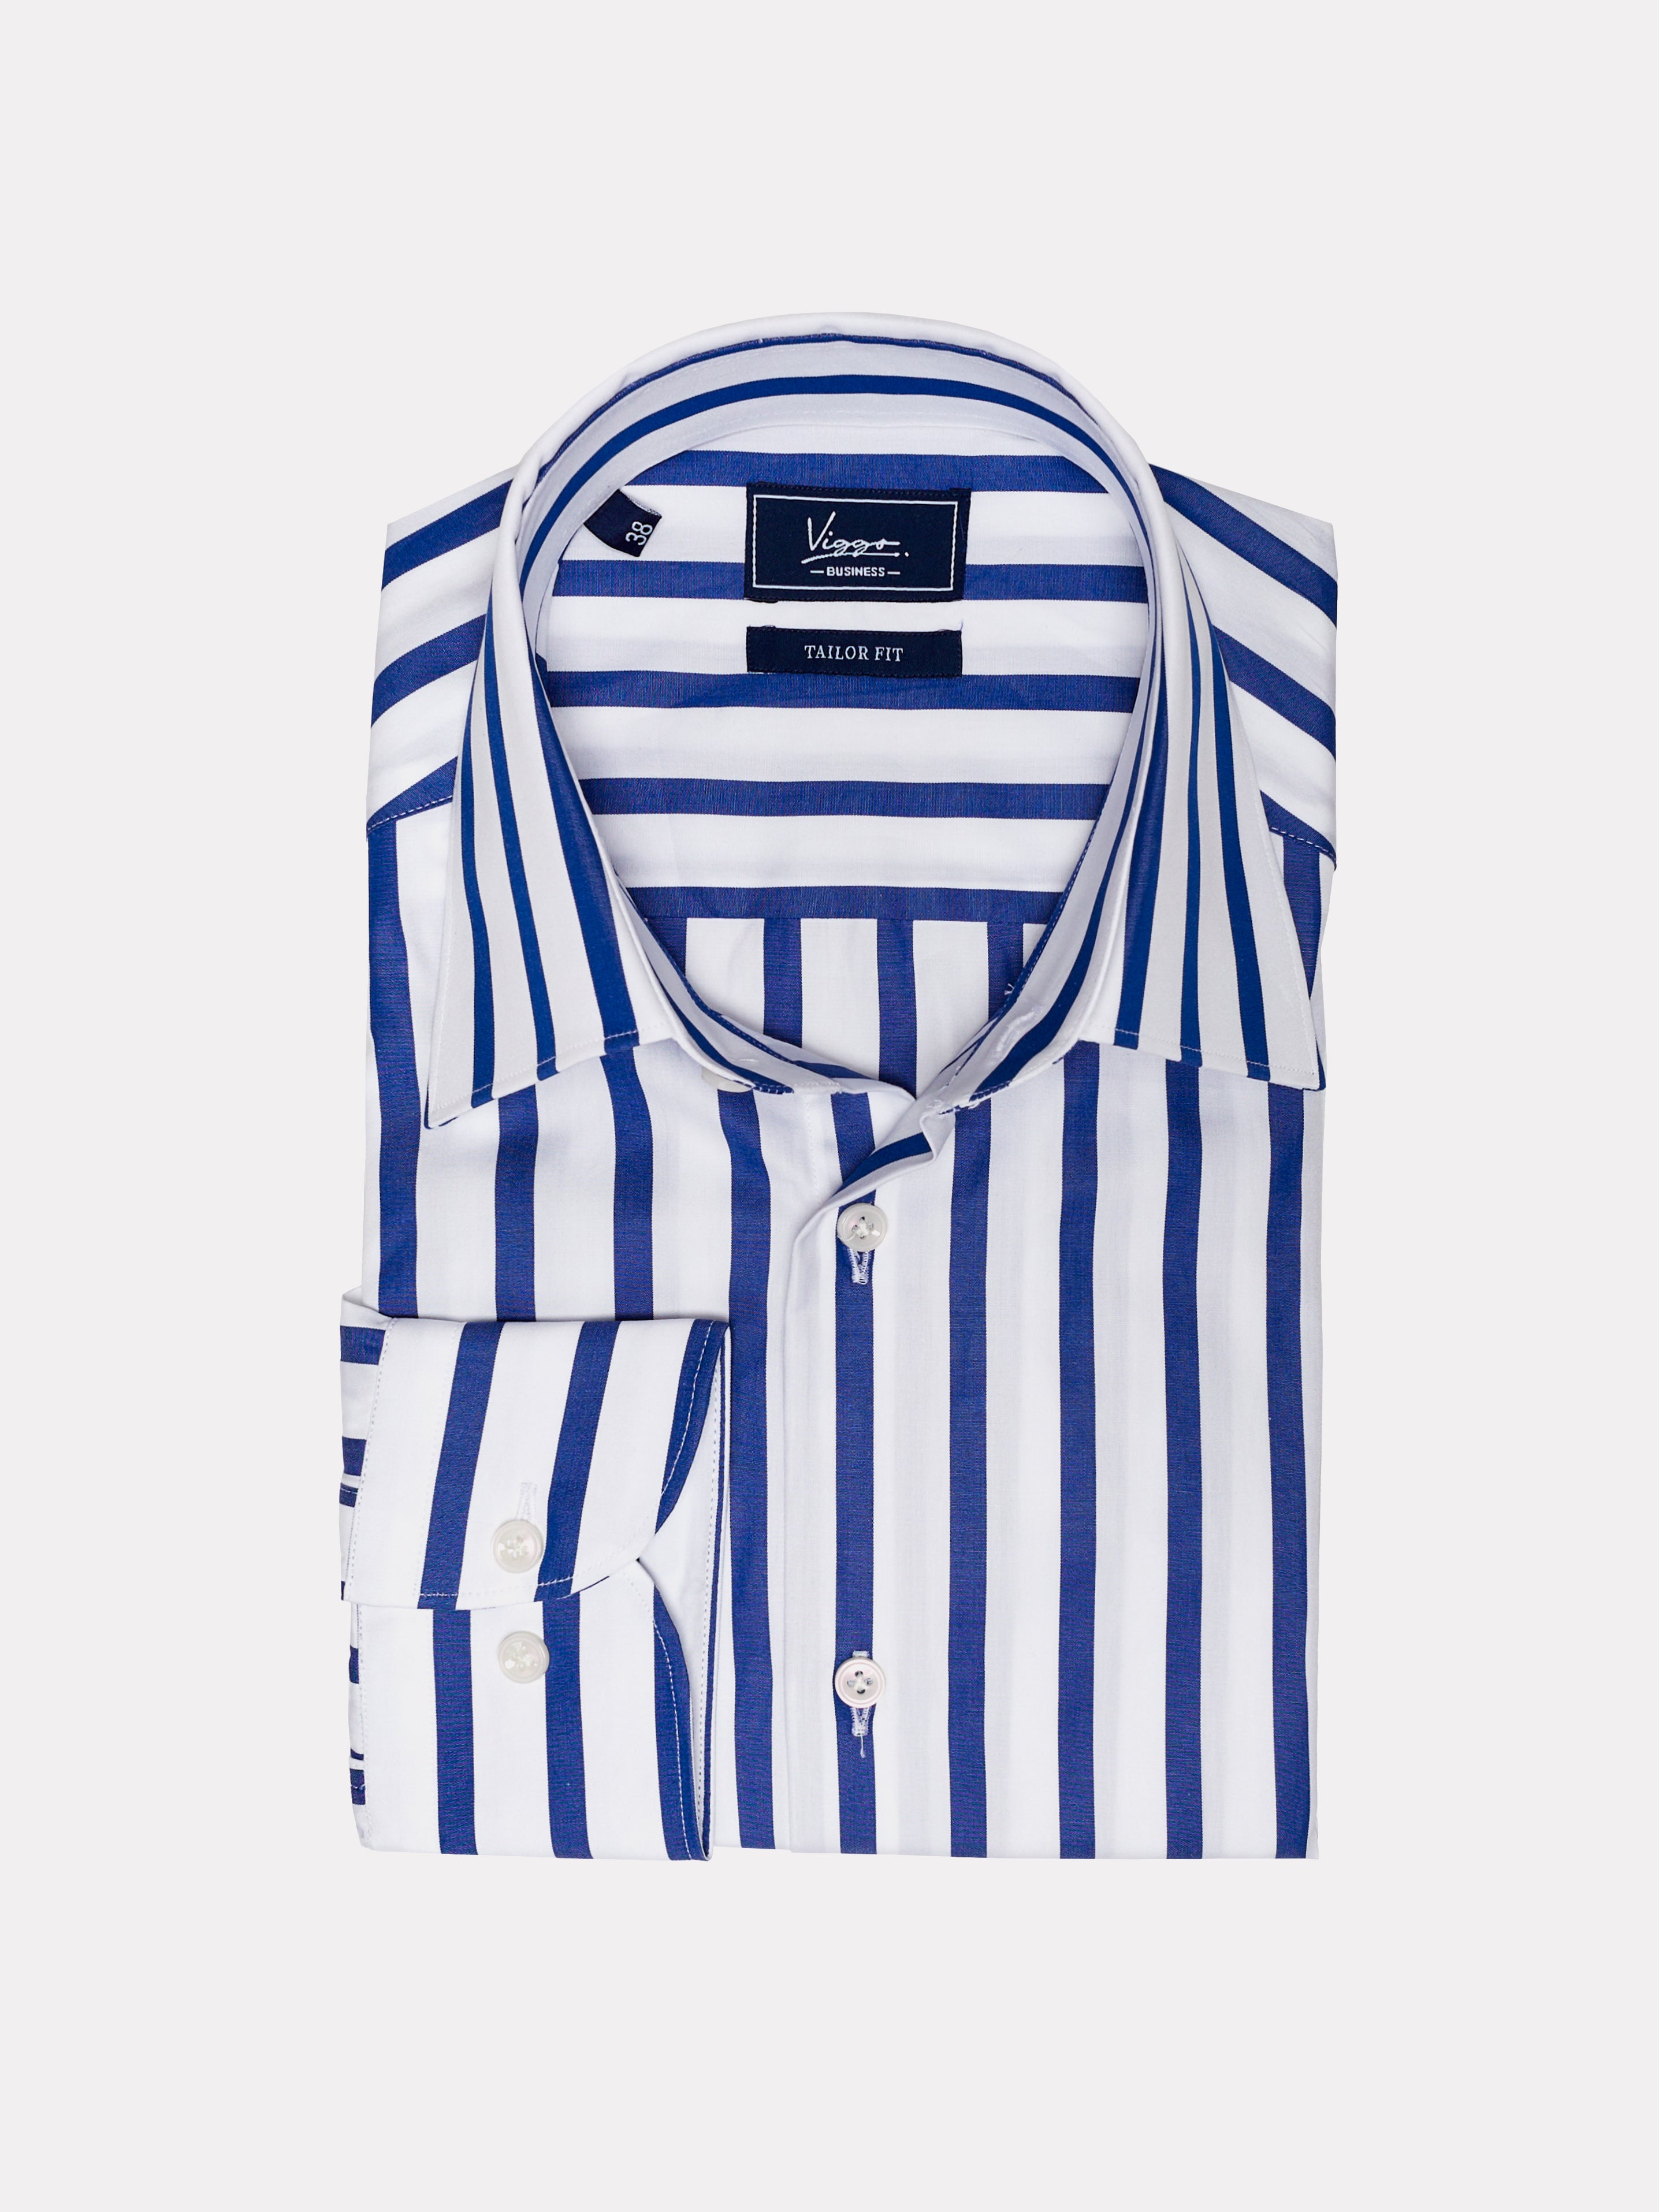 White shirt with wide blue stripes